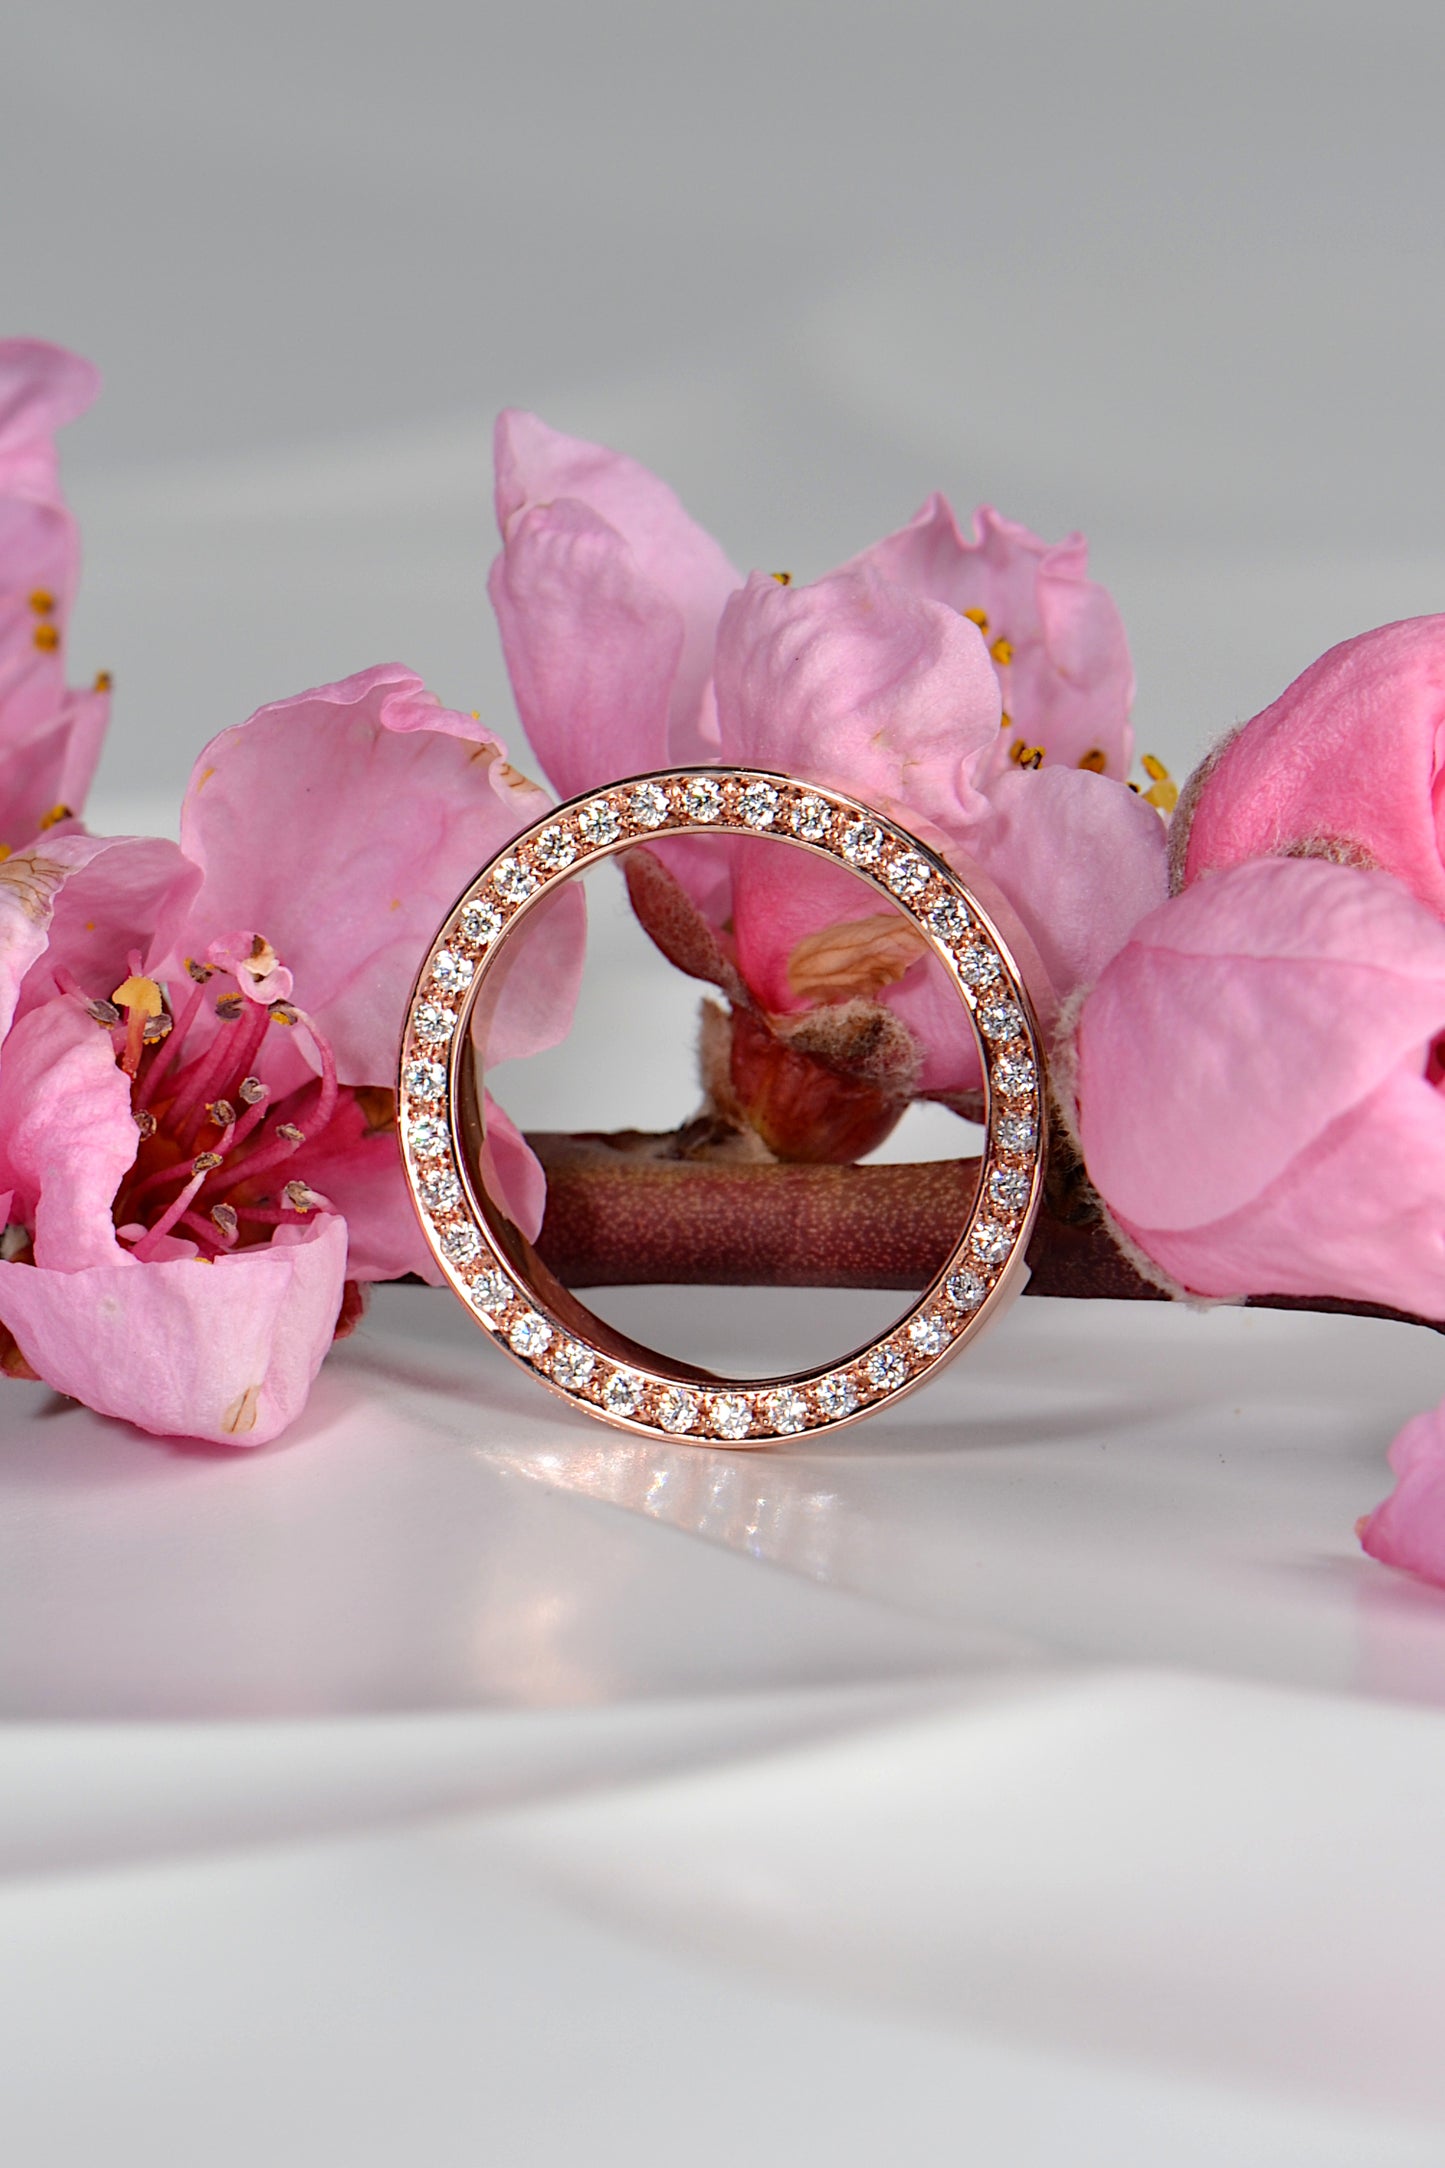 stunning halo designer diamond wedding ring in rose gold that is different and special